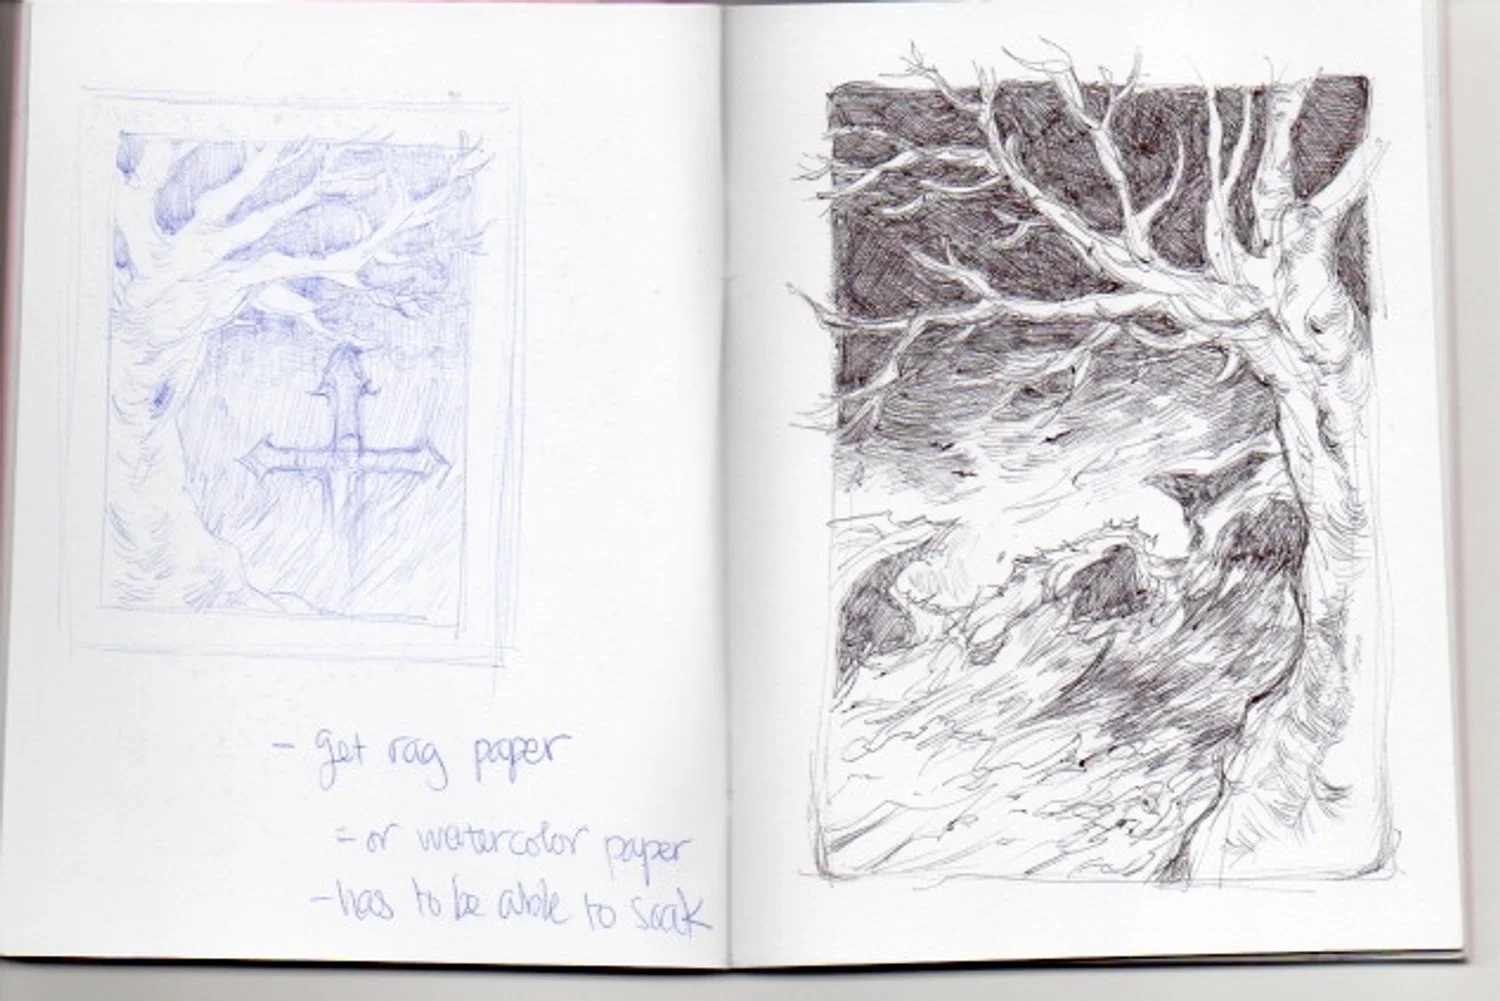 Sketch thumbnails done in ballpoint pen.